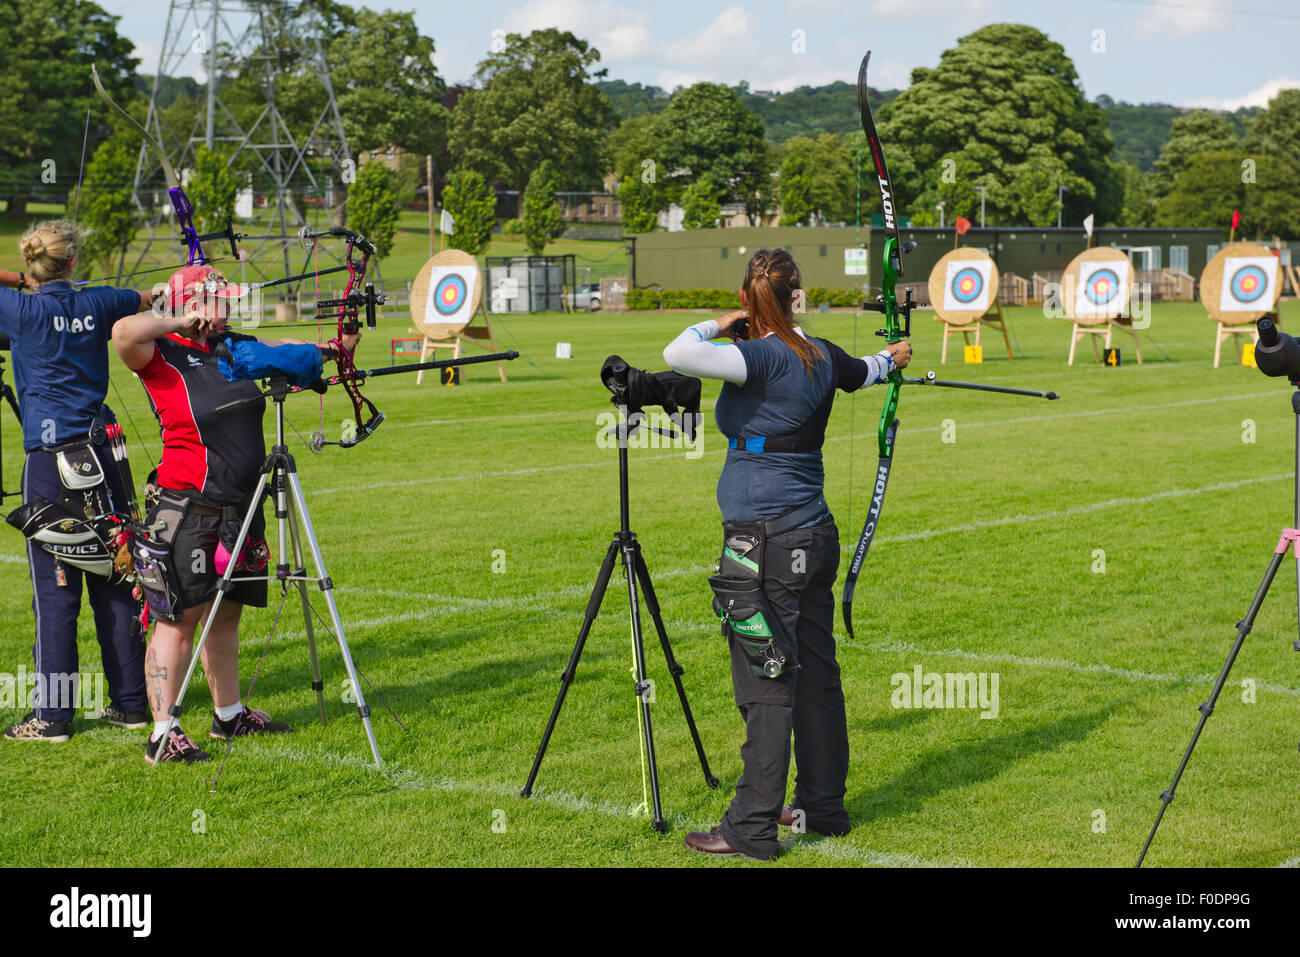 Woman archers shooting compound or recurve bows in archery competition, Rowdon Meadows, Bradford, West Yorkshire. N.C.A.S. World Stock Photo